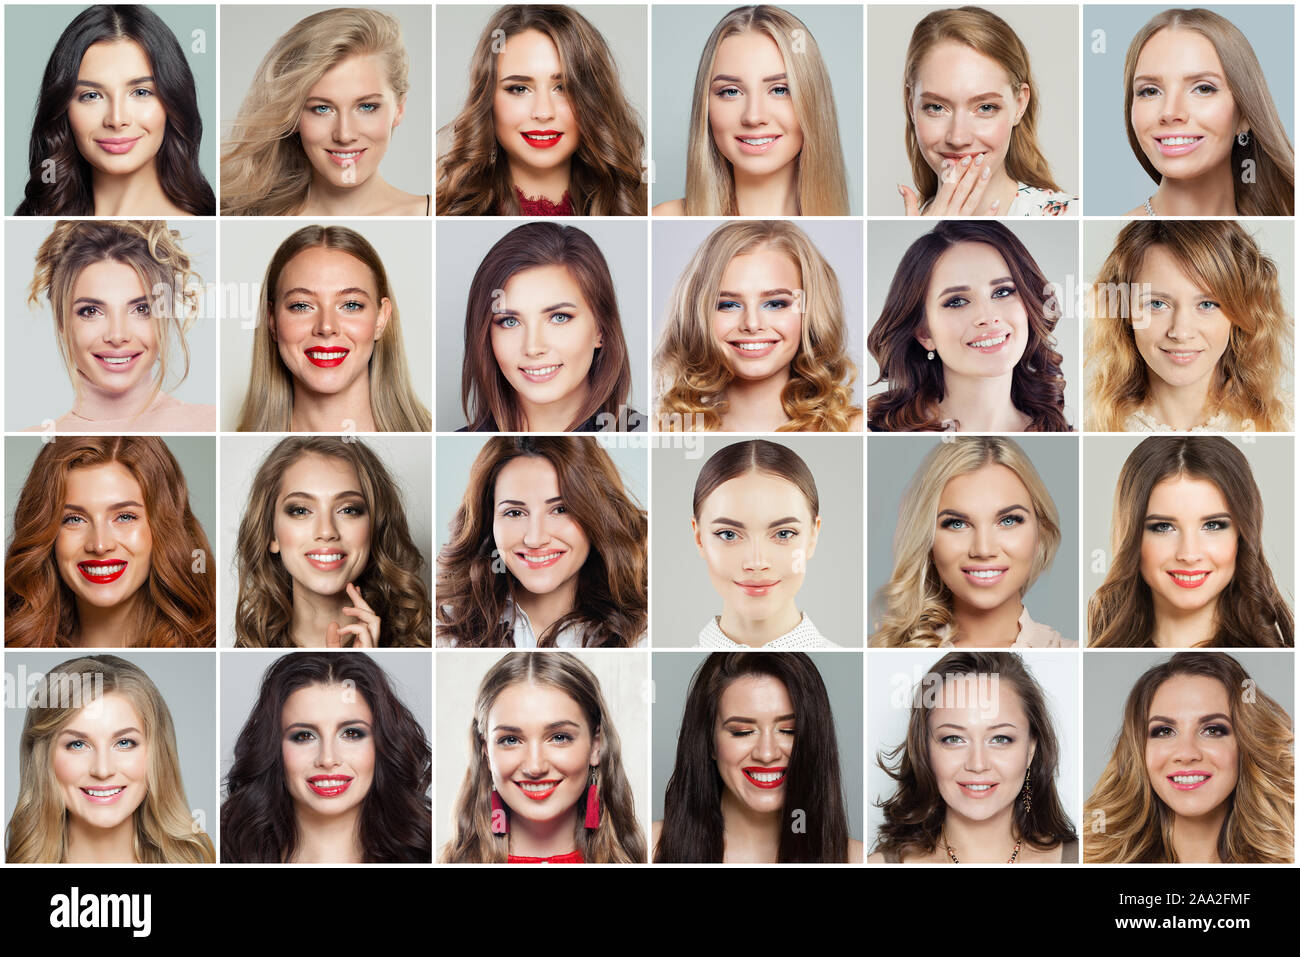 Different women faces collage. Woman faces smiling and laughing, positive emotions, emotional expression Stock Photo